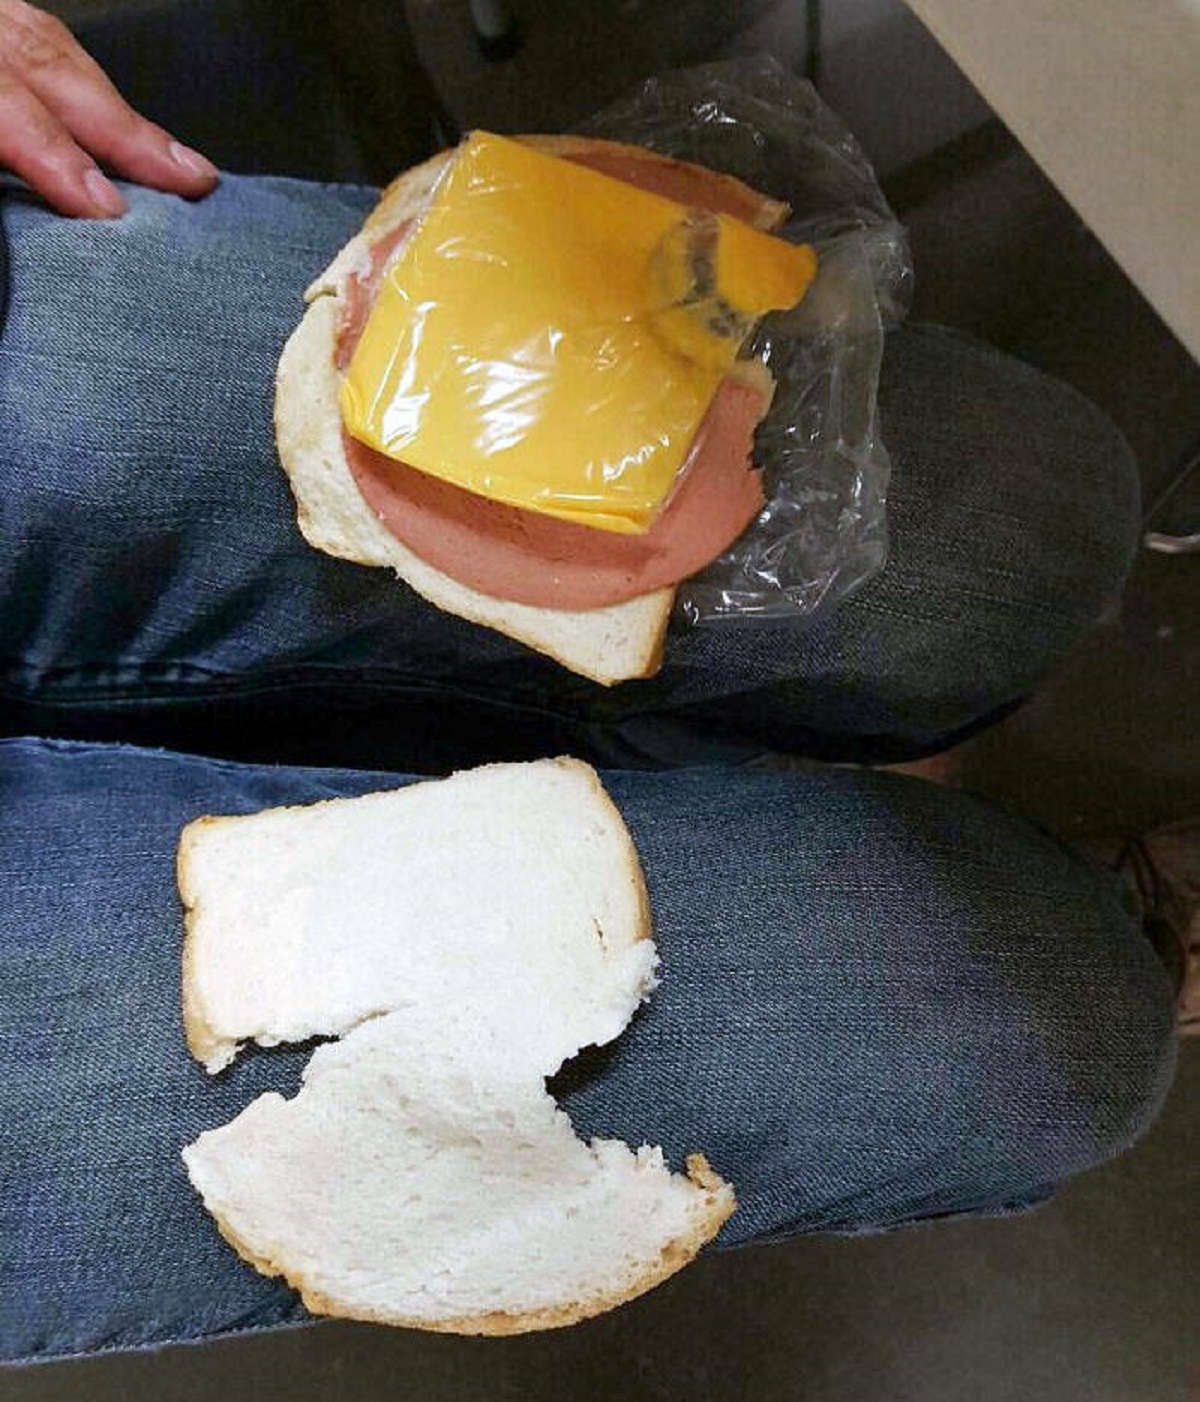 "Girlfriend Forgot To Take The Plastic Off The Cheese"